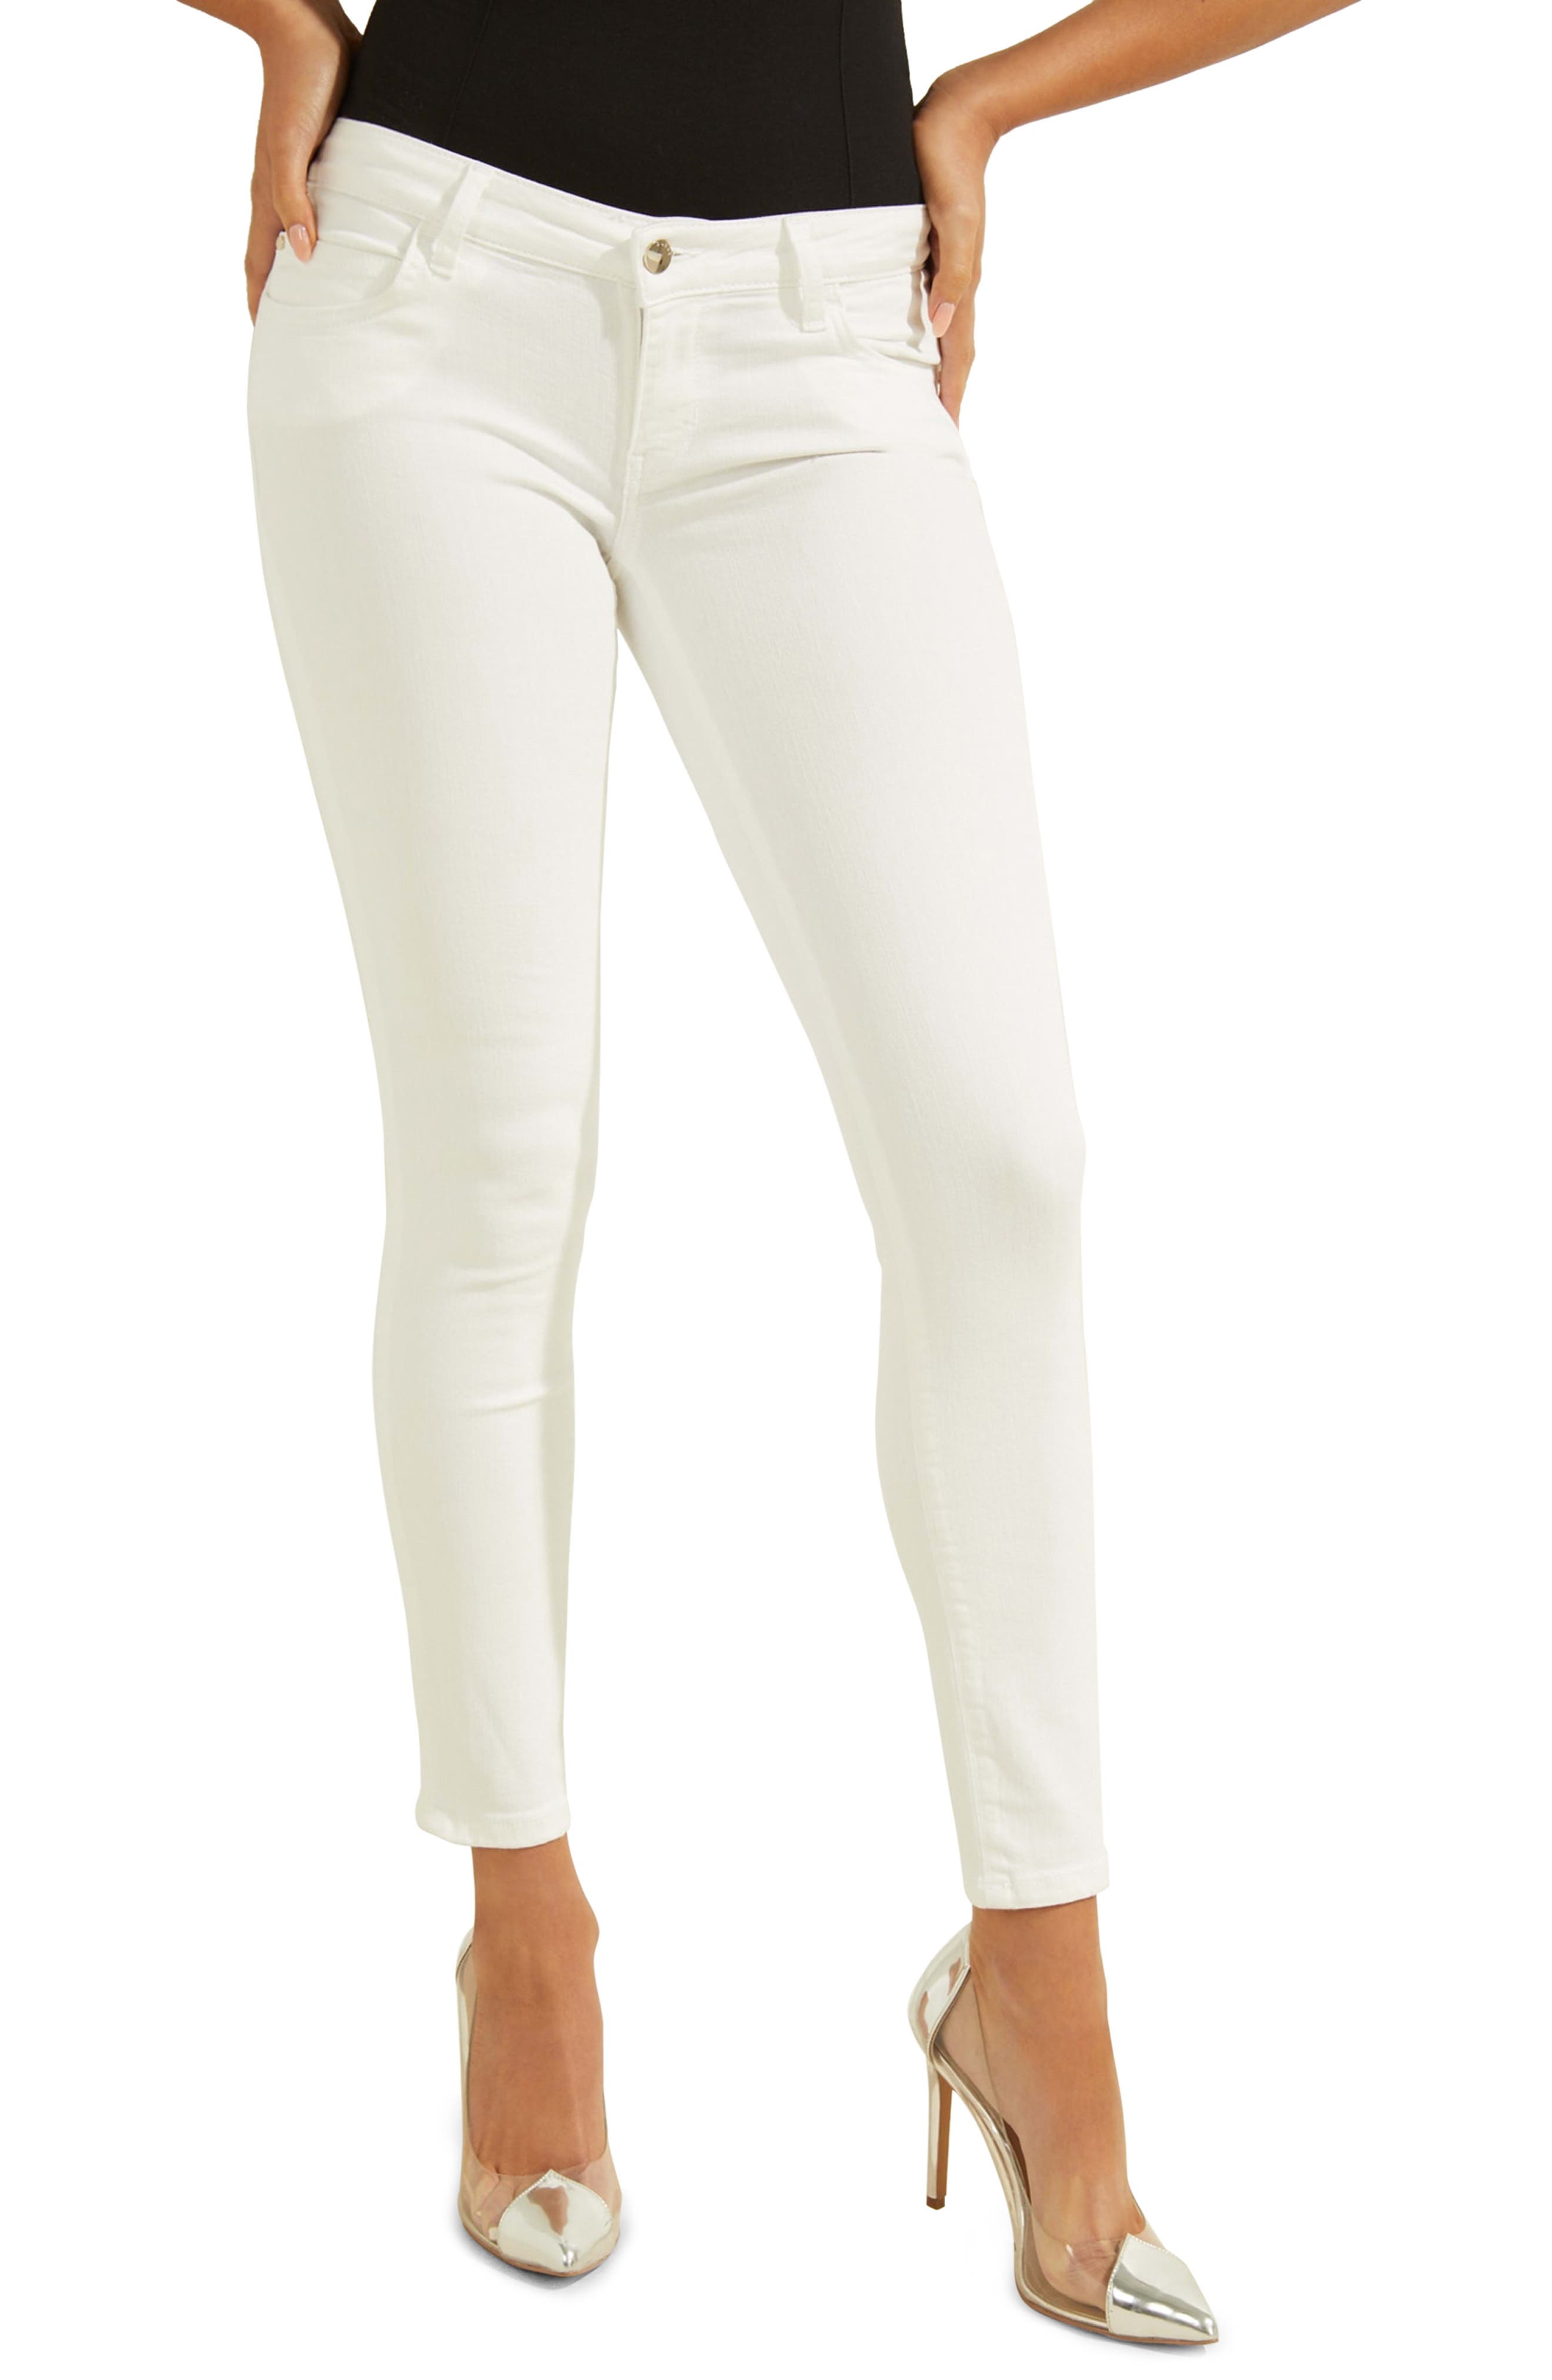 Guess Marilyn Ankle Skinny Jeans In Papermoon White